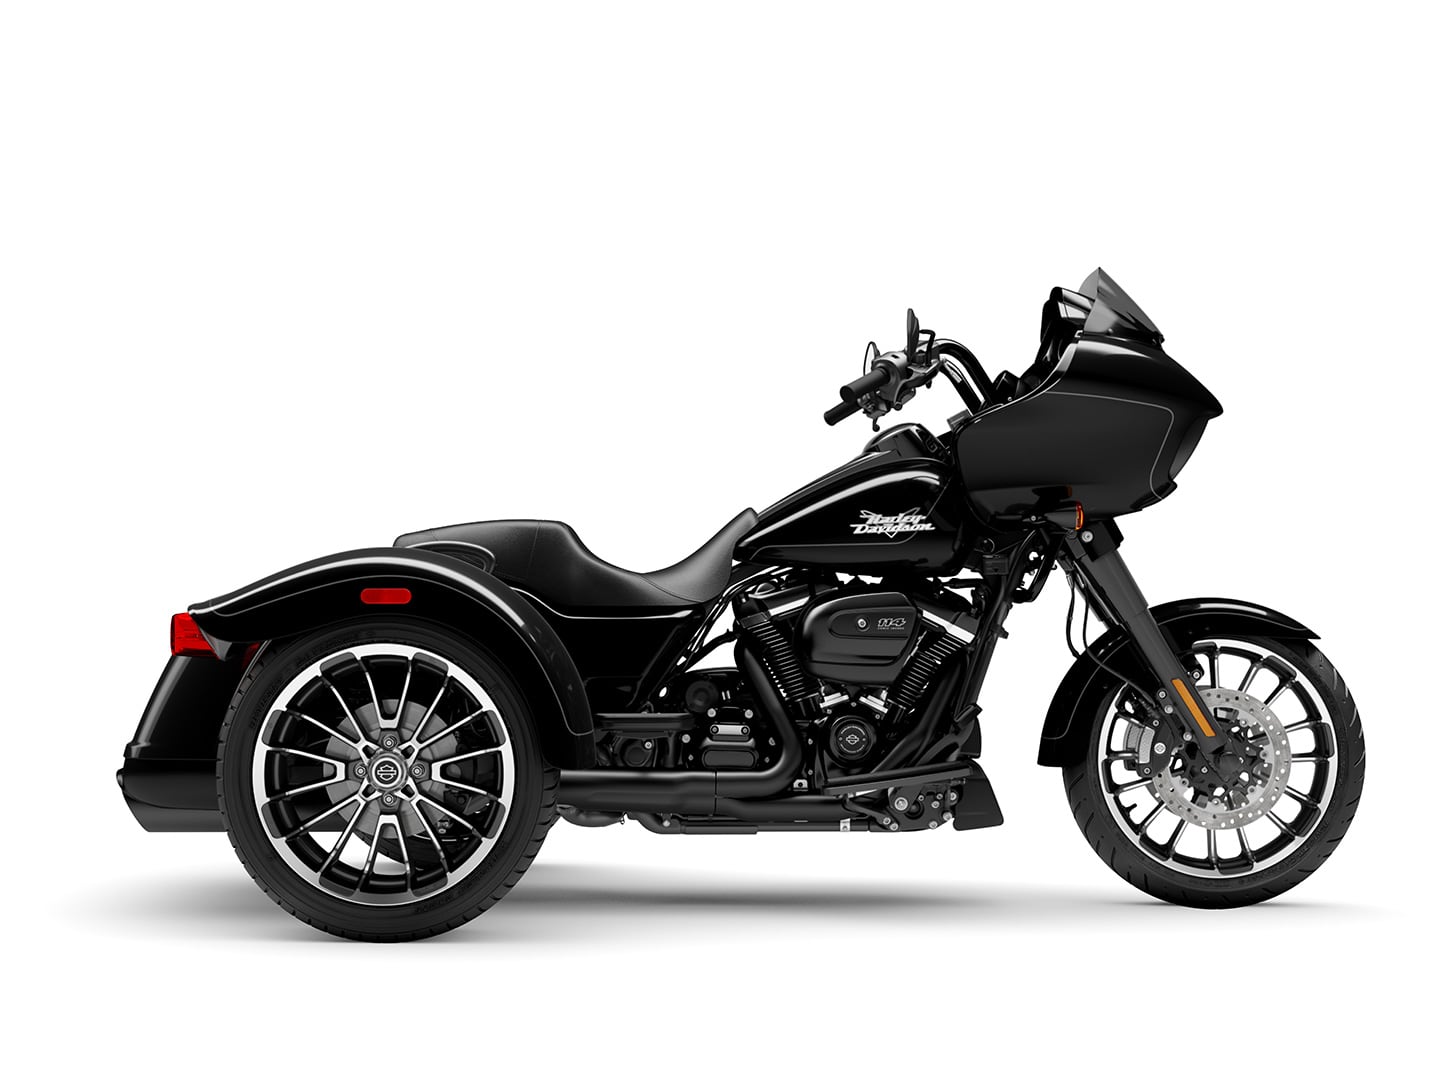 The Road Glide 3 in Vivid Black ($750 extra).